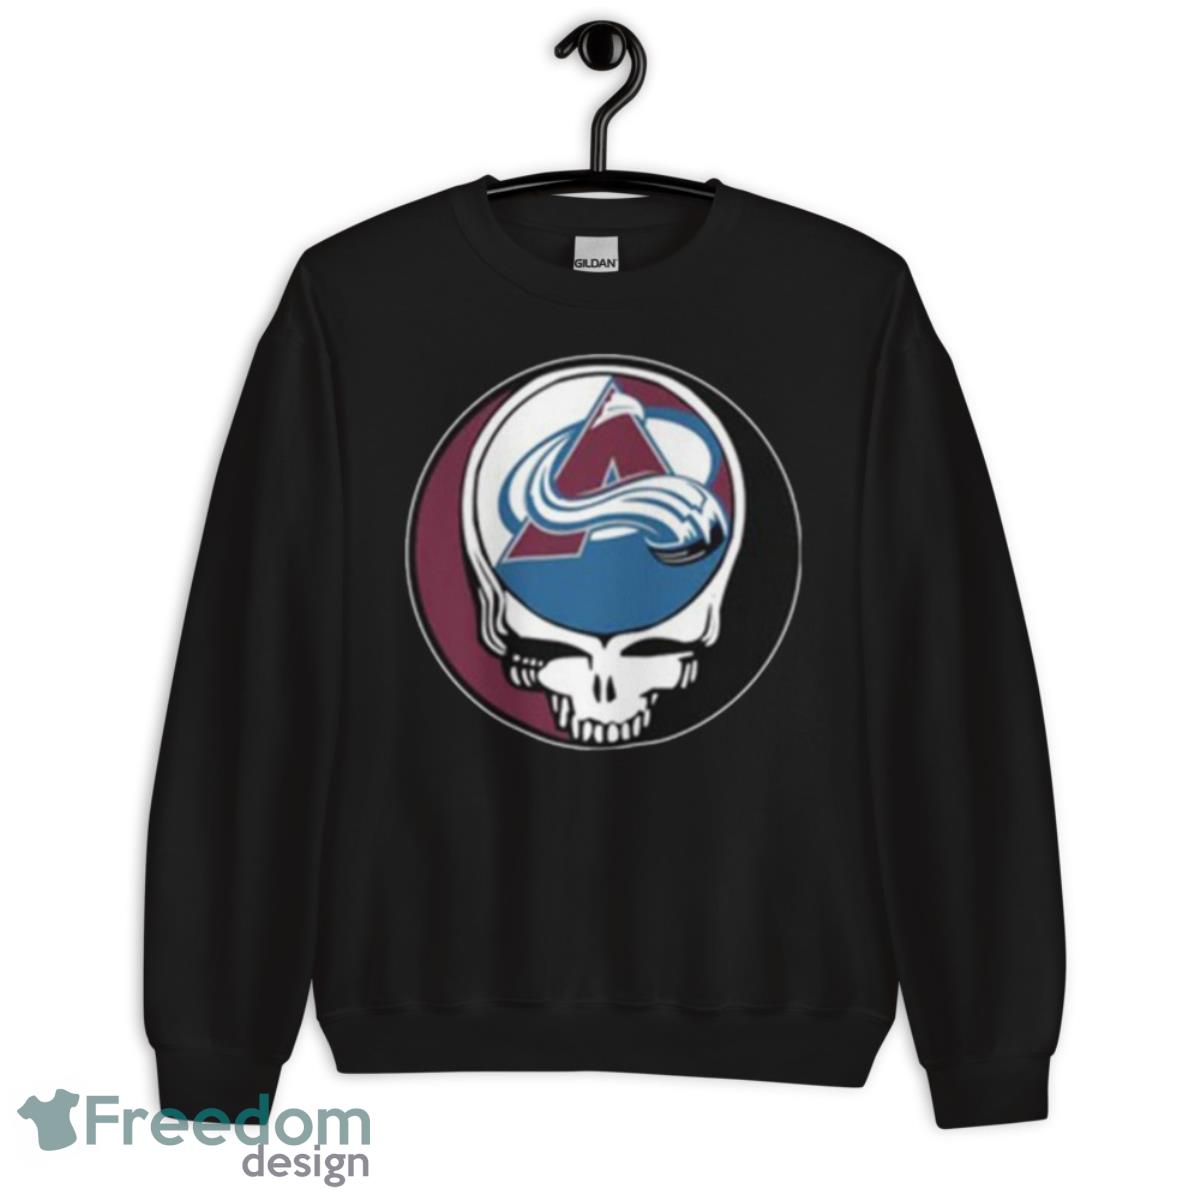 Colorado Avalanche on X: Brand new Grateful Dead jerseys are here this  season! Join us on October 10th:  #GoAvsGo   / X